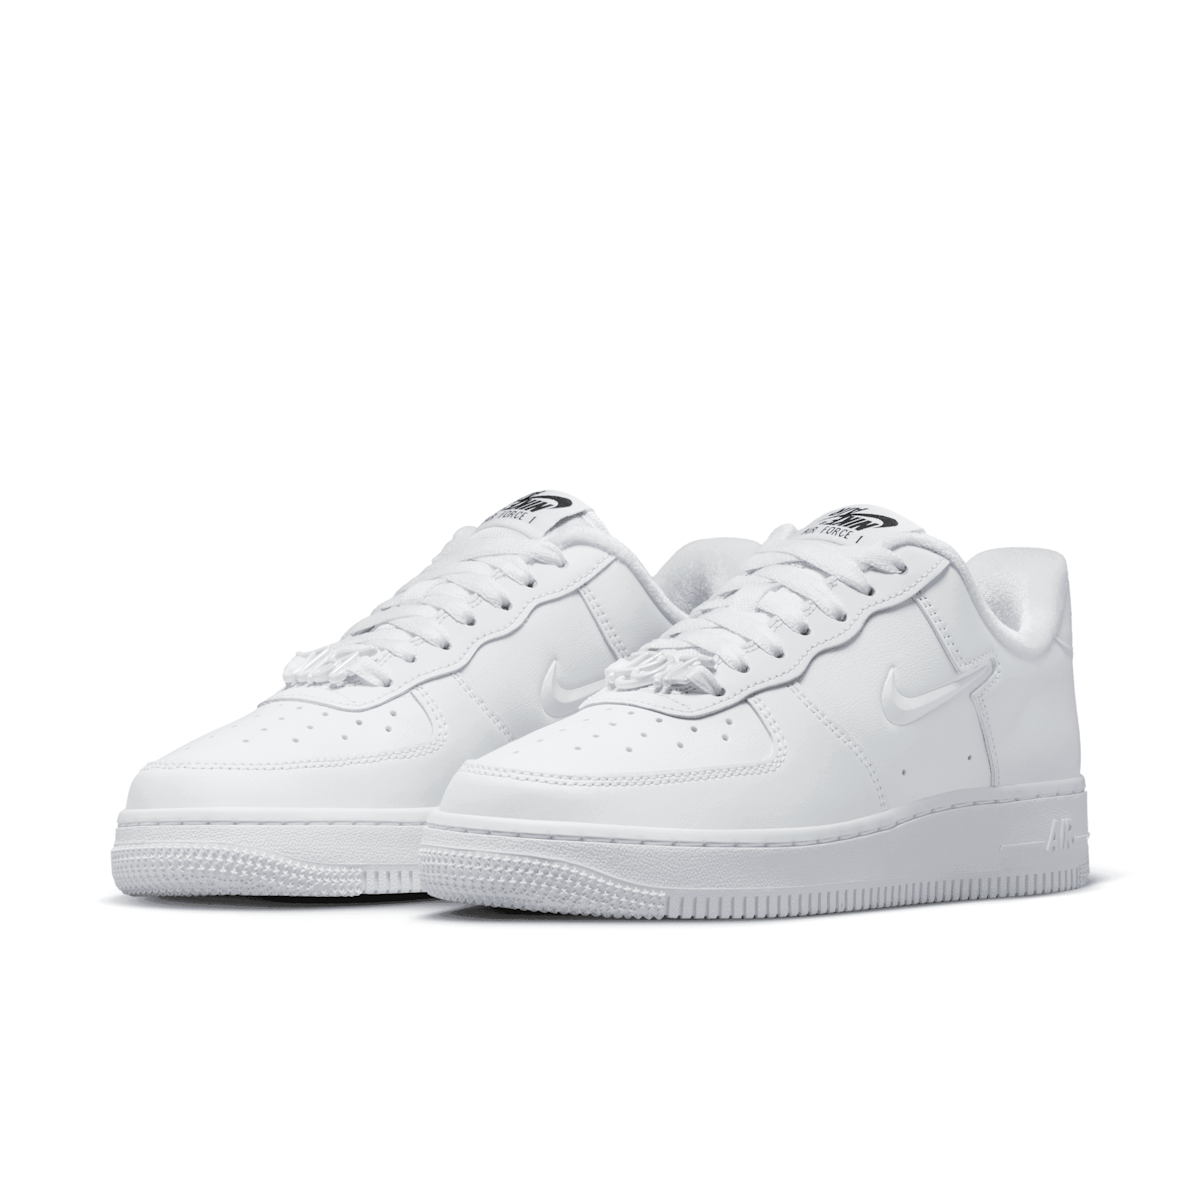 Nike Air Force 1 Low '07 FM Cut Out Swoosh White Game Royal Men's